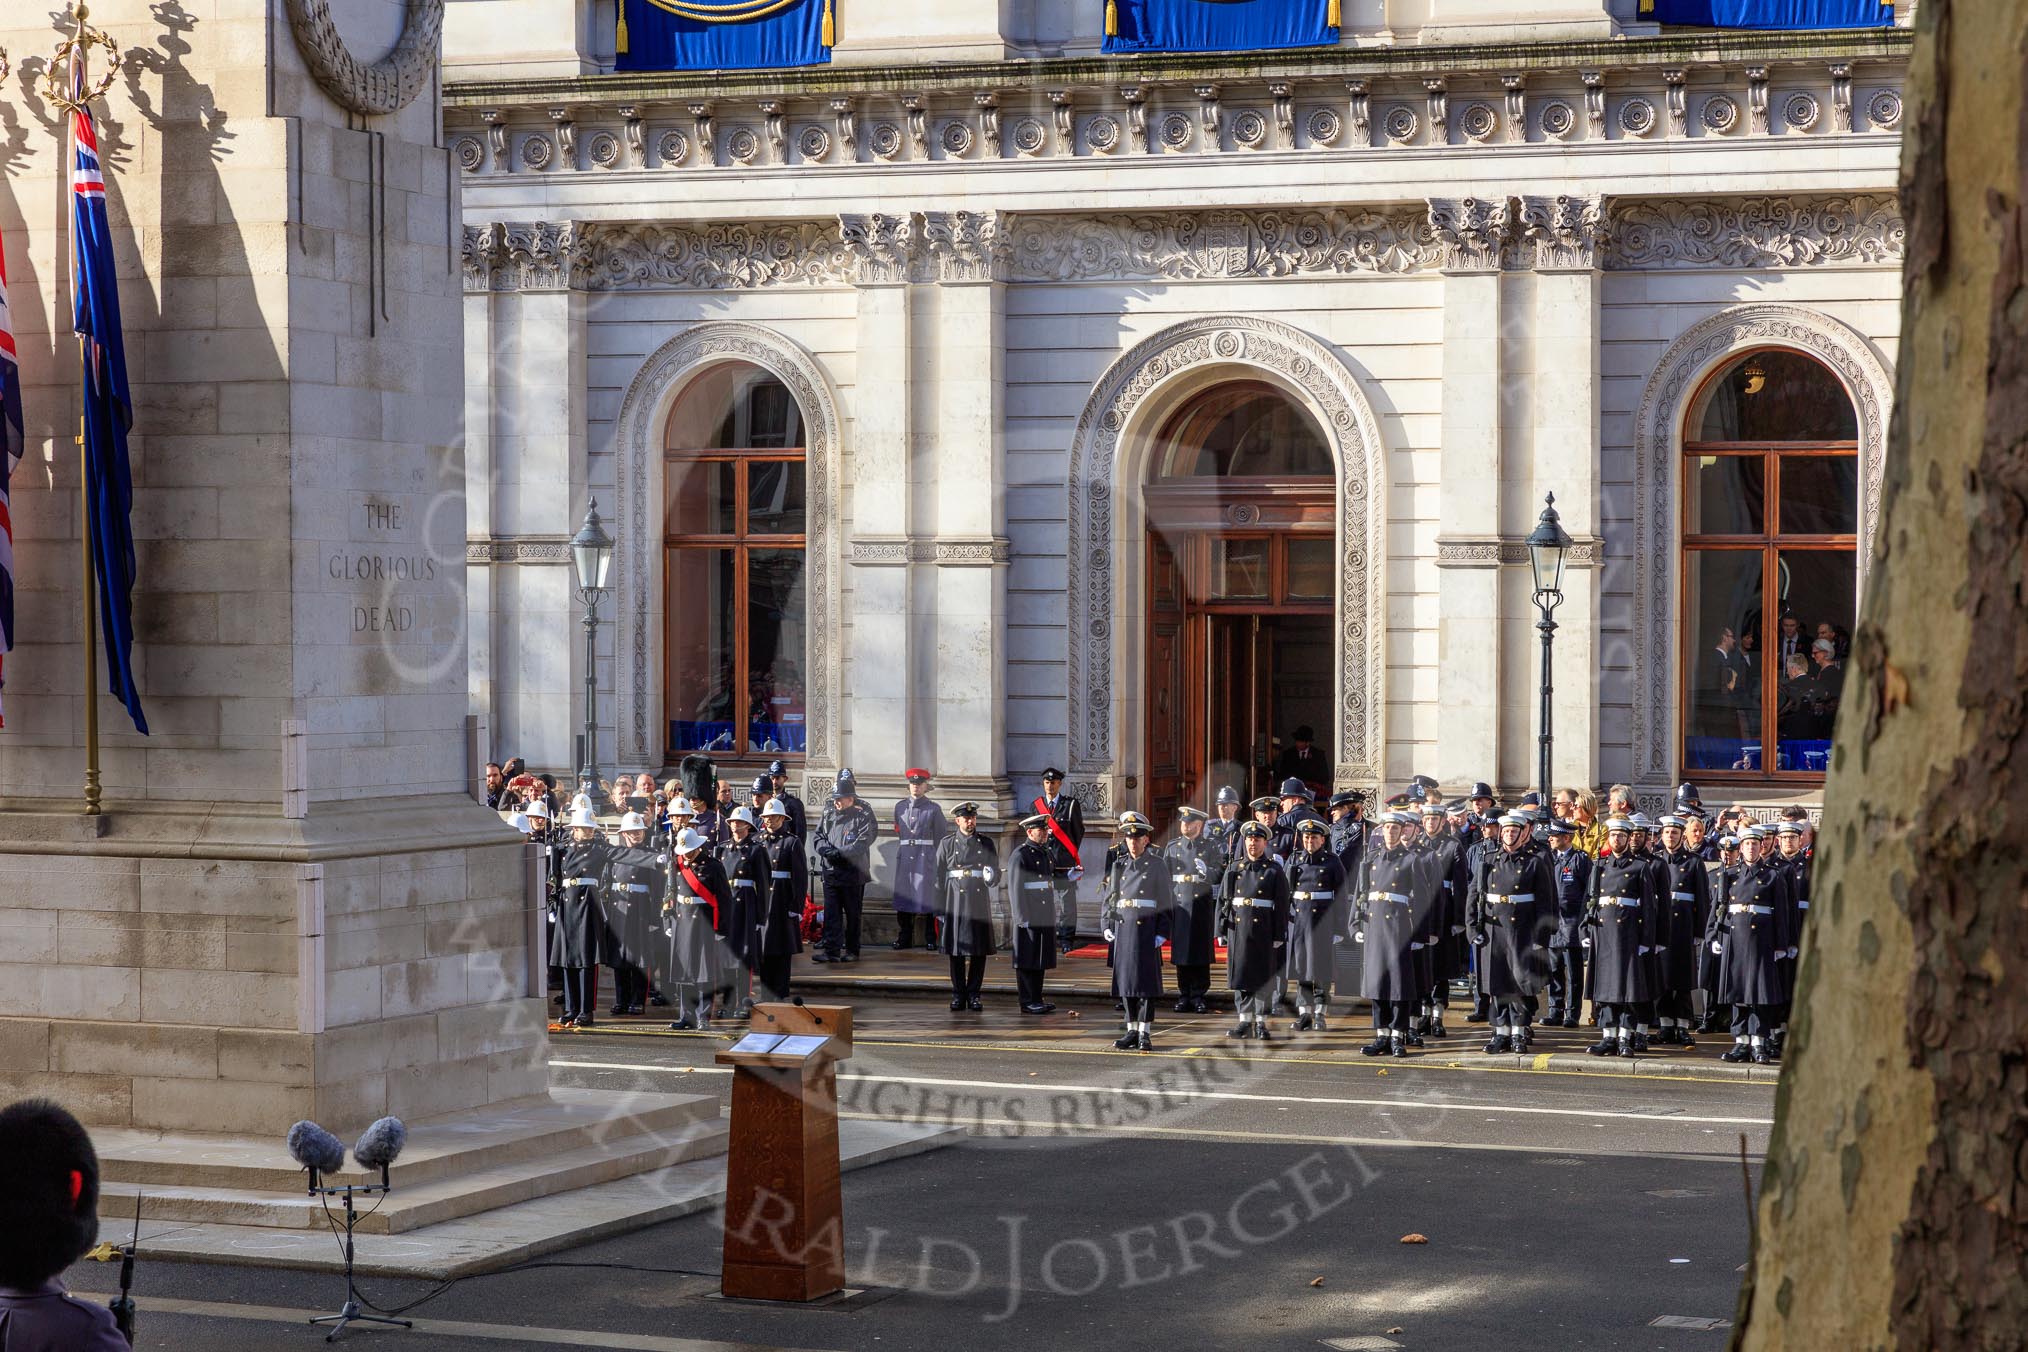 The entrance of the Foreign and Commonwealth Office with the Service detachment from the Royal Marines on the left, and the Service detachment from the Royal Navy on the right, before the Remembrance Sunday Cenotaph Ceremony 2018 at Horse Guards Parade, Westminster, London, 11 November 2018, 10:20.